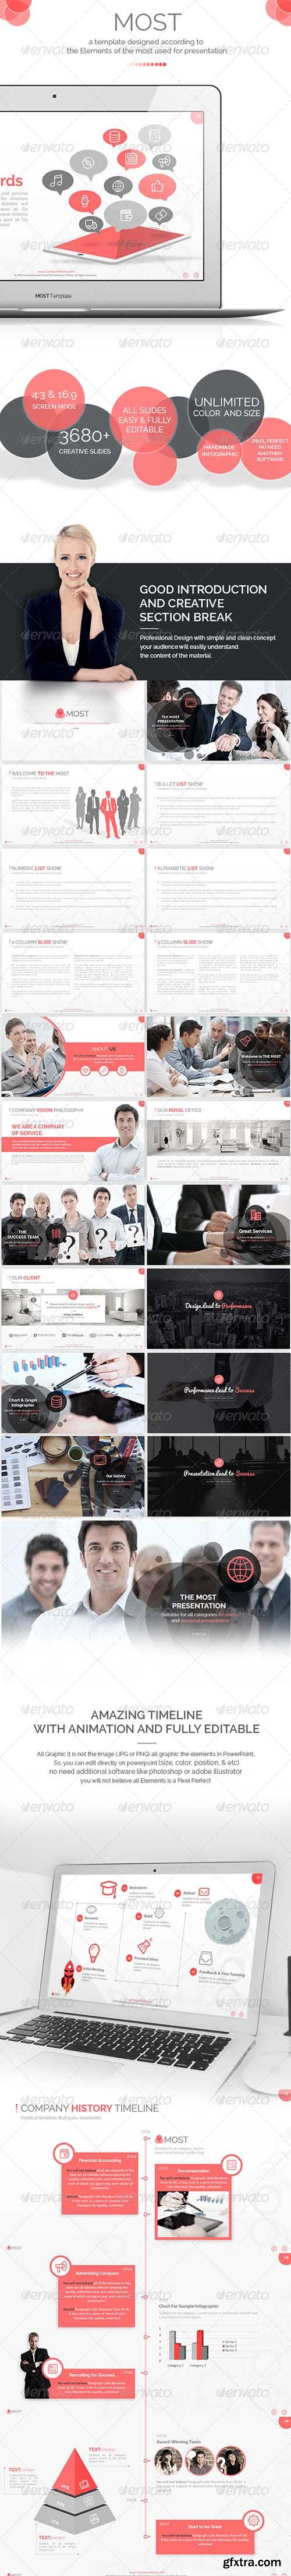 GraphicRiver - Most - The Most PowerPoint Template 8197738